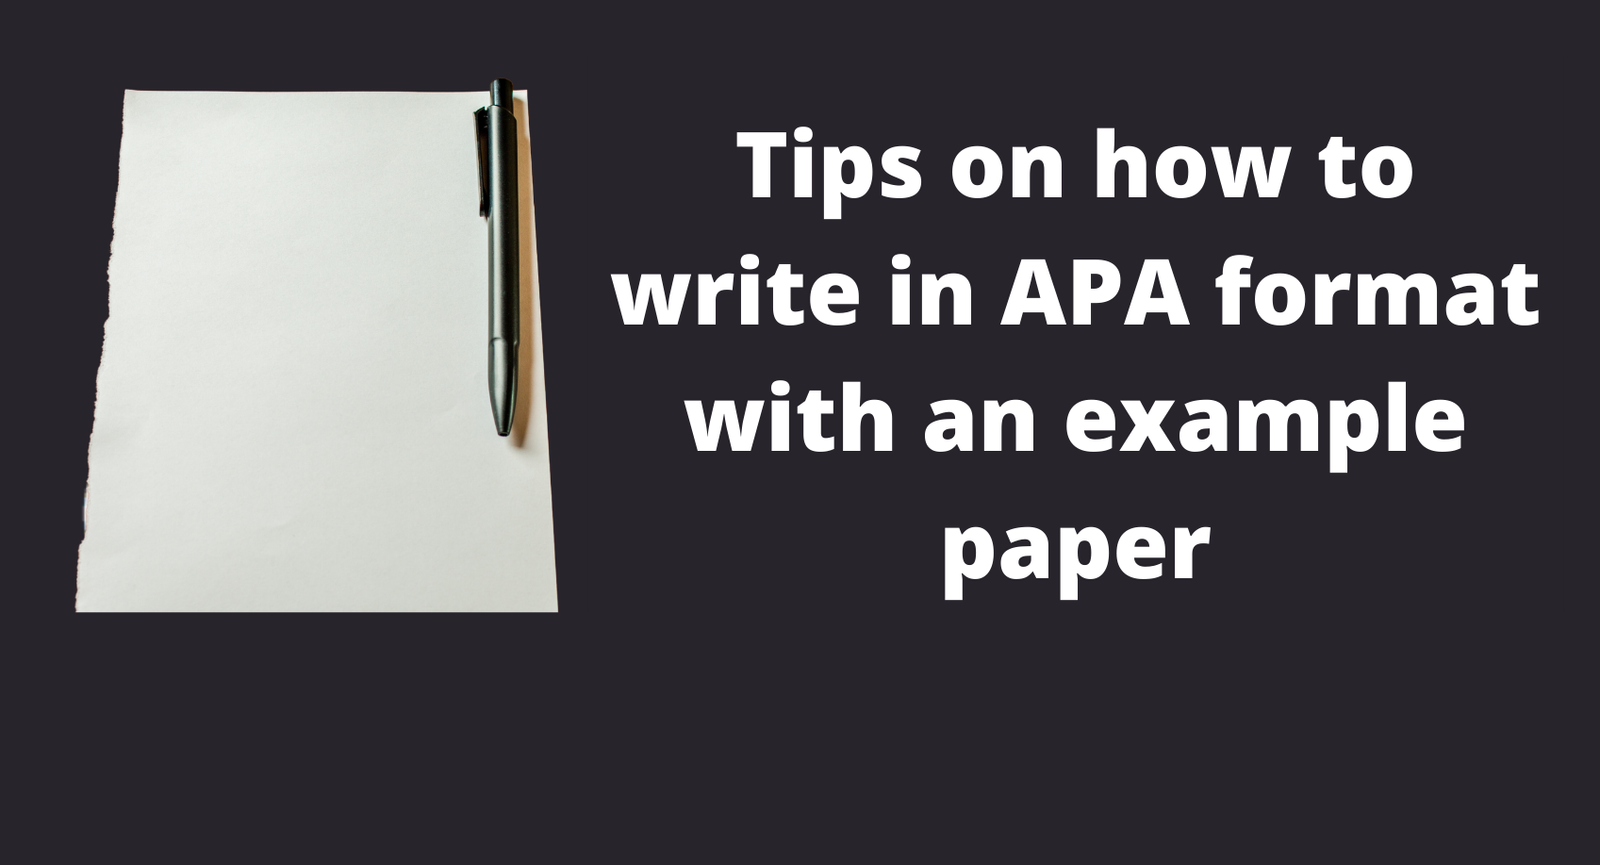 You are currently viewing Tips on how to write in APA format with an example paper